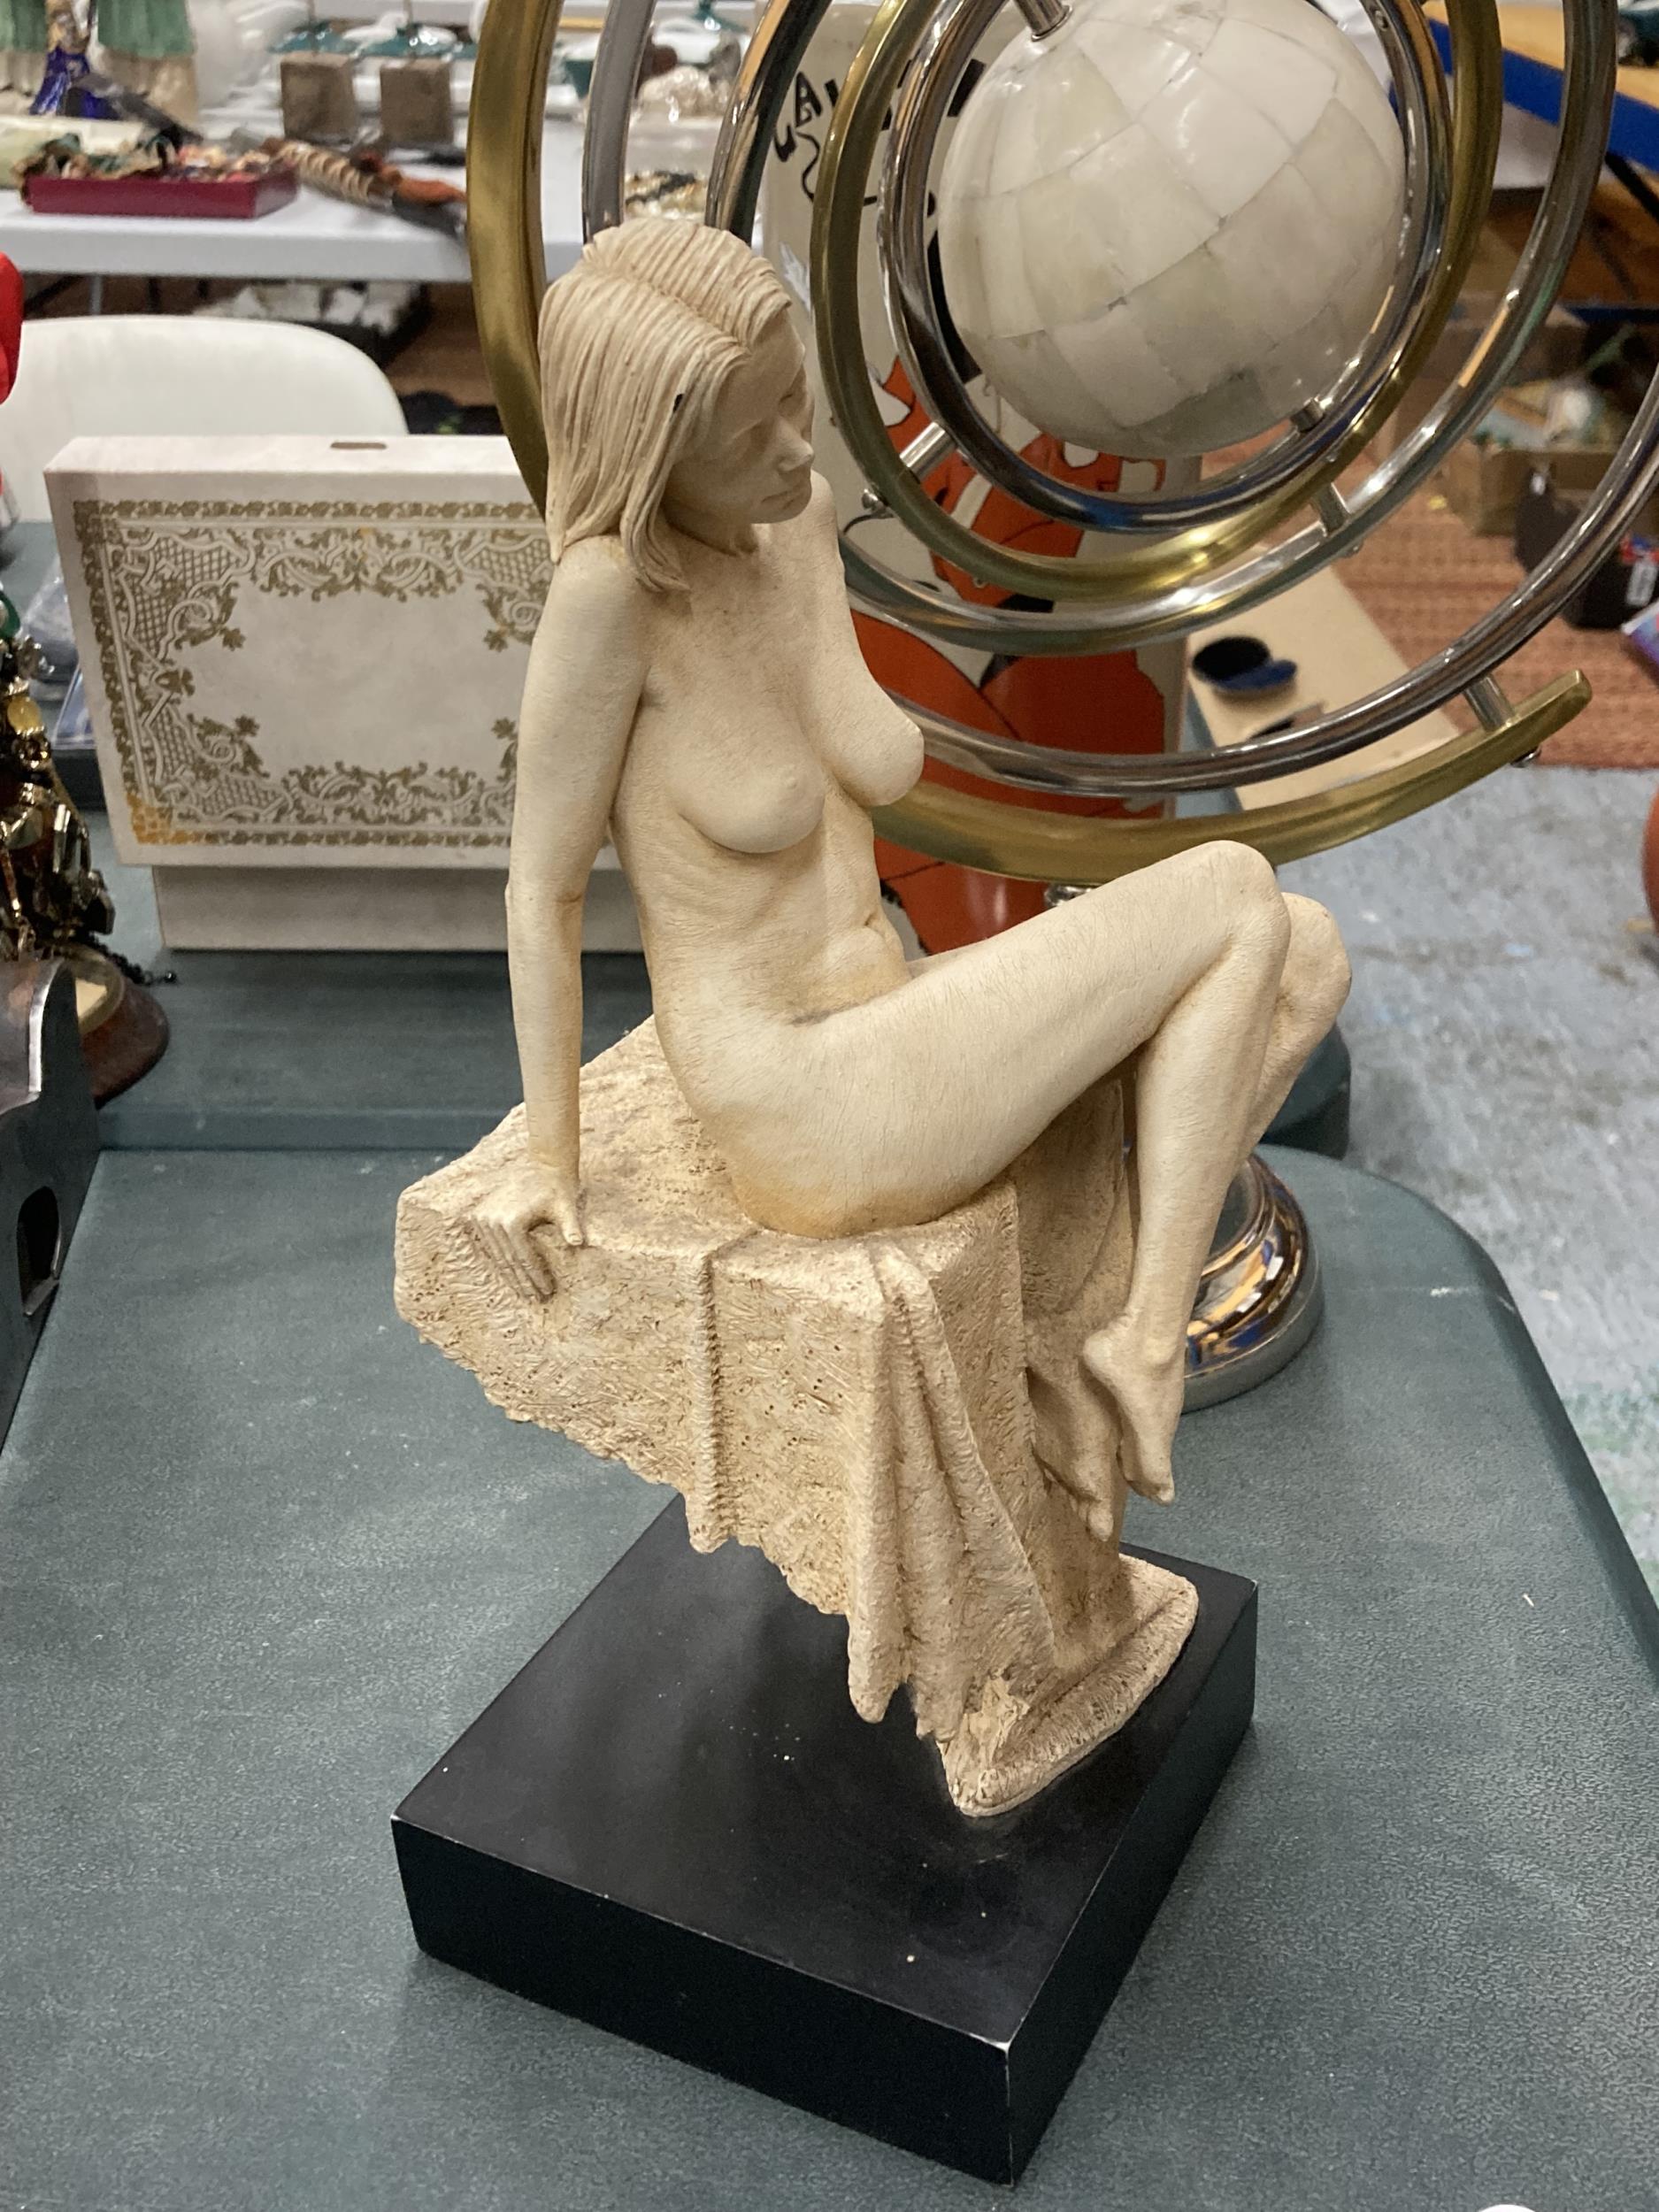 A STATUE OF A NUDE WOMAN ON BLACK BASE - Image 2 of 3